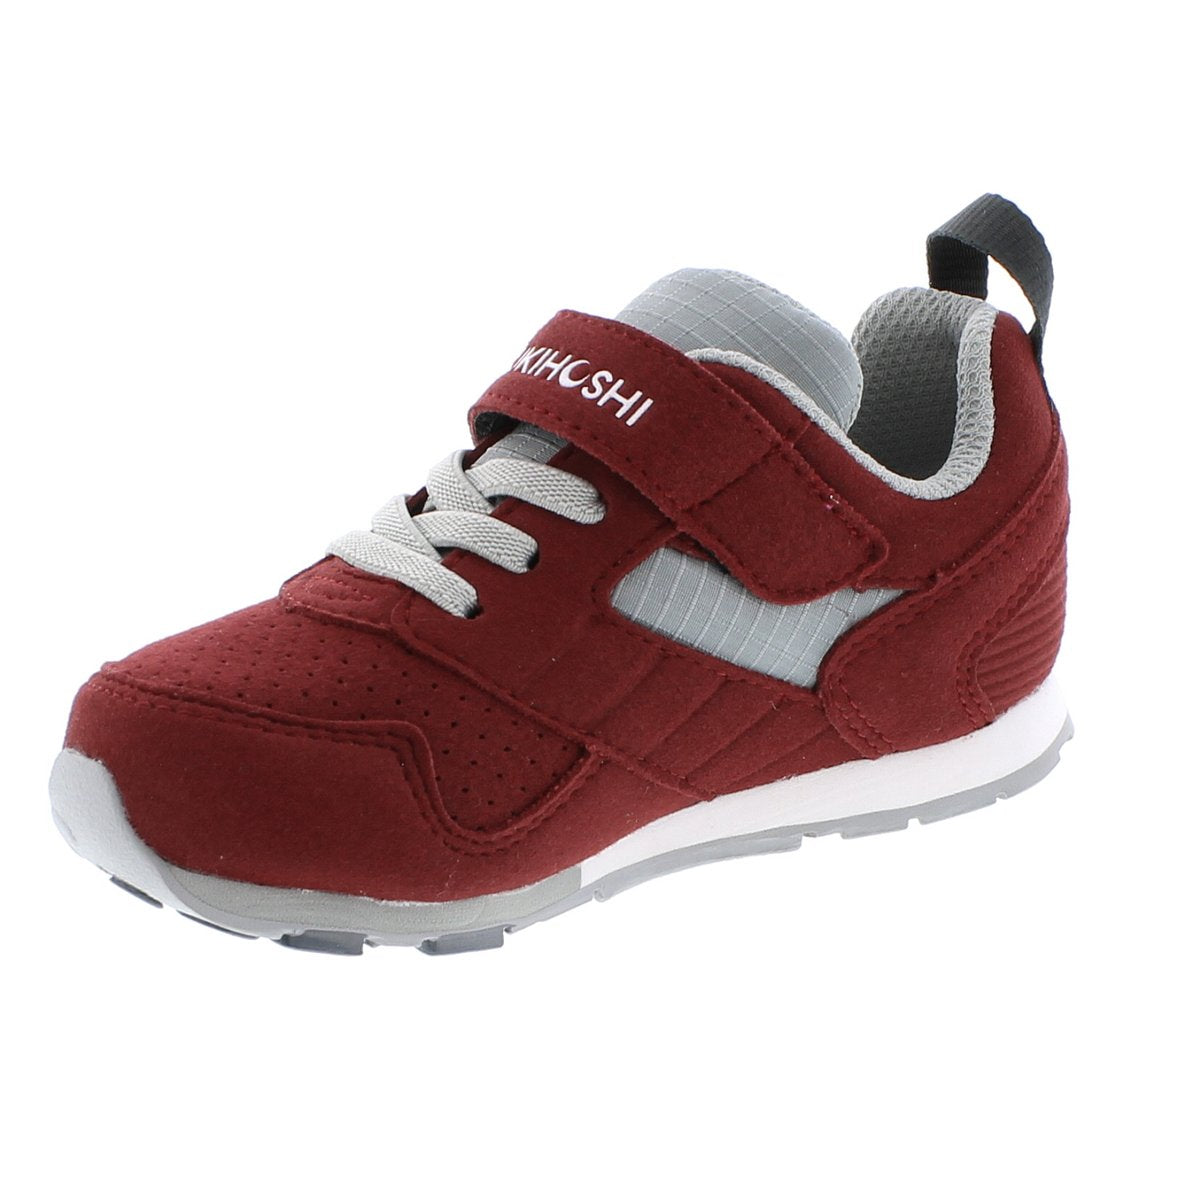 Child Tsukihoshi Racer Sneaker in Crimson/Gray from the front view